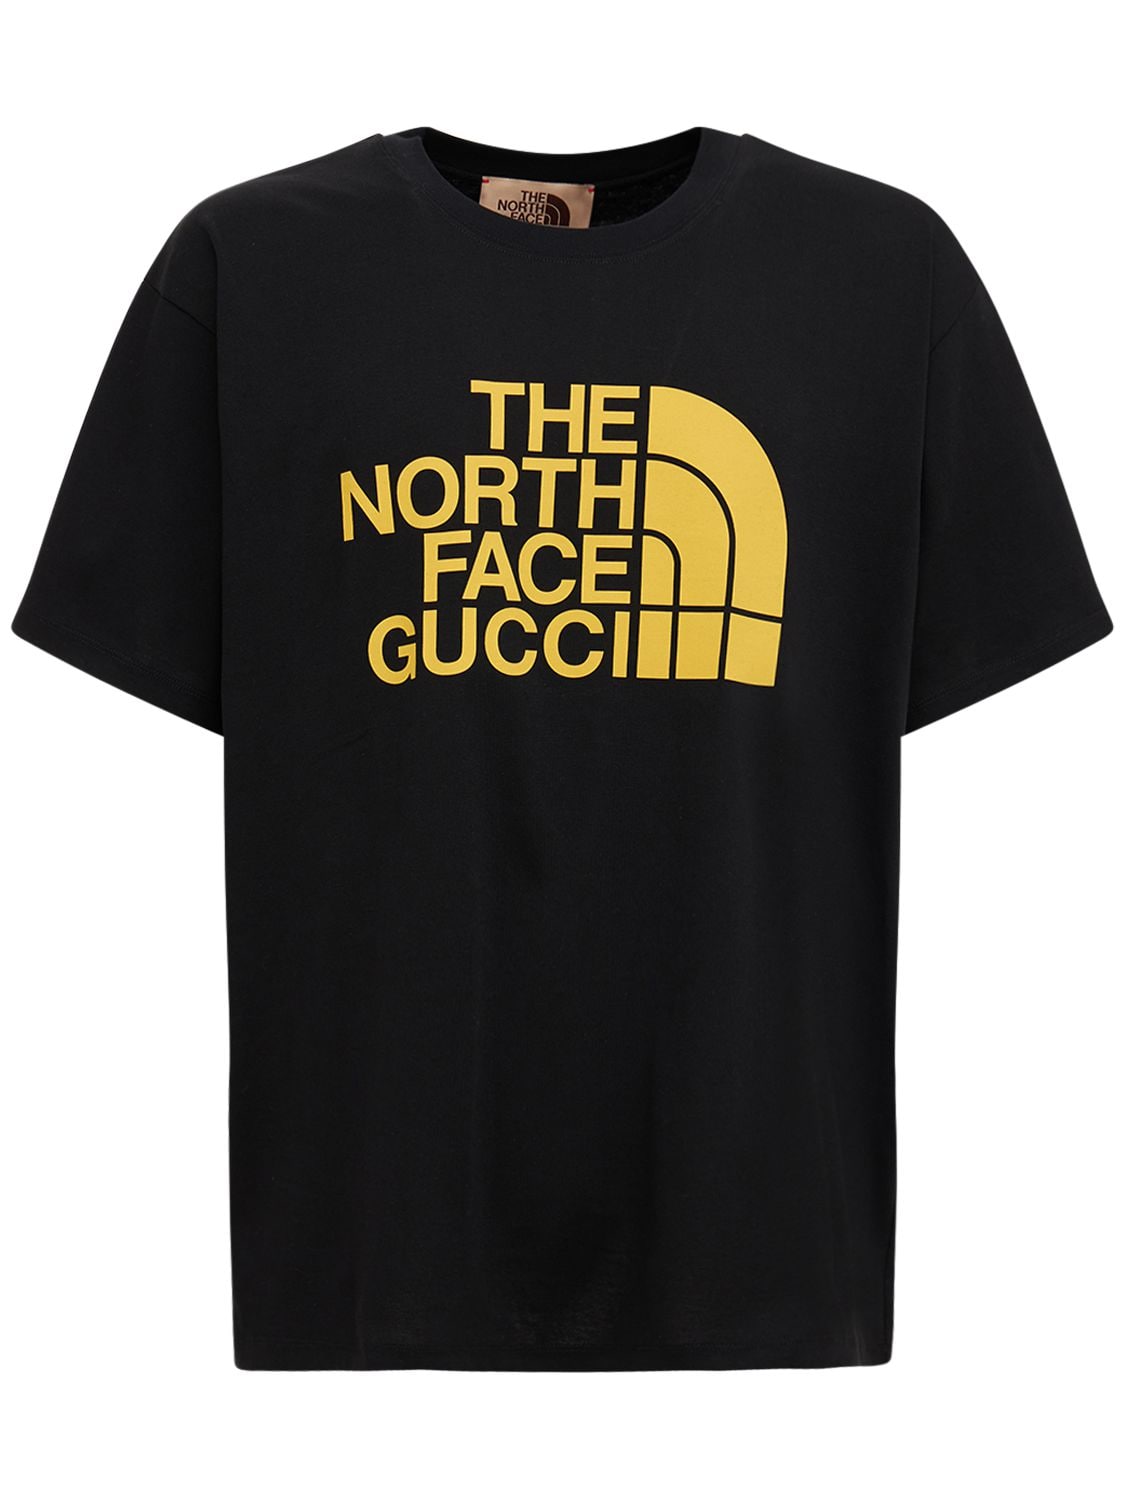 The North Face X Gucci Cotton T-shirt